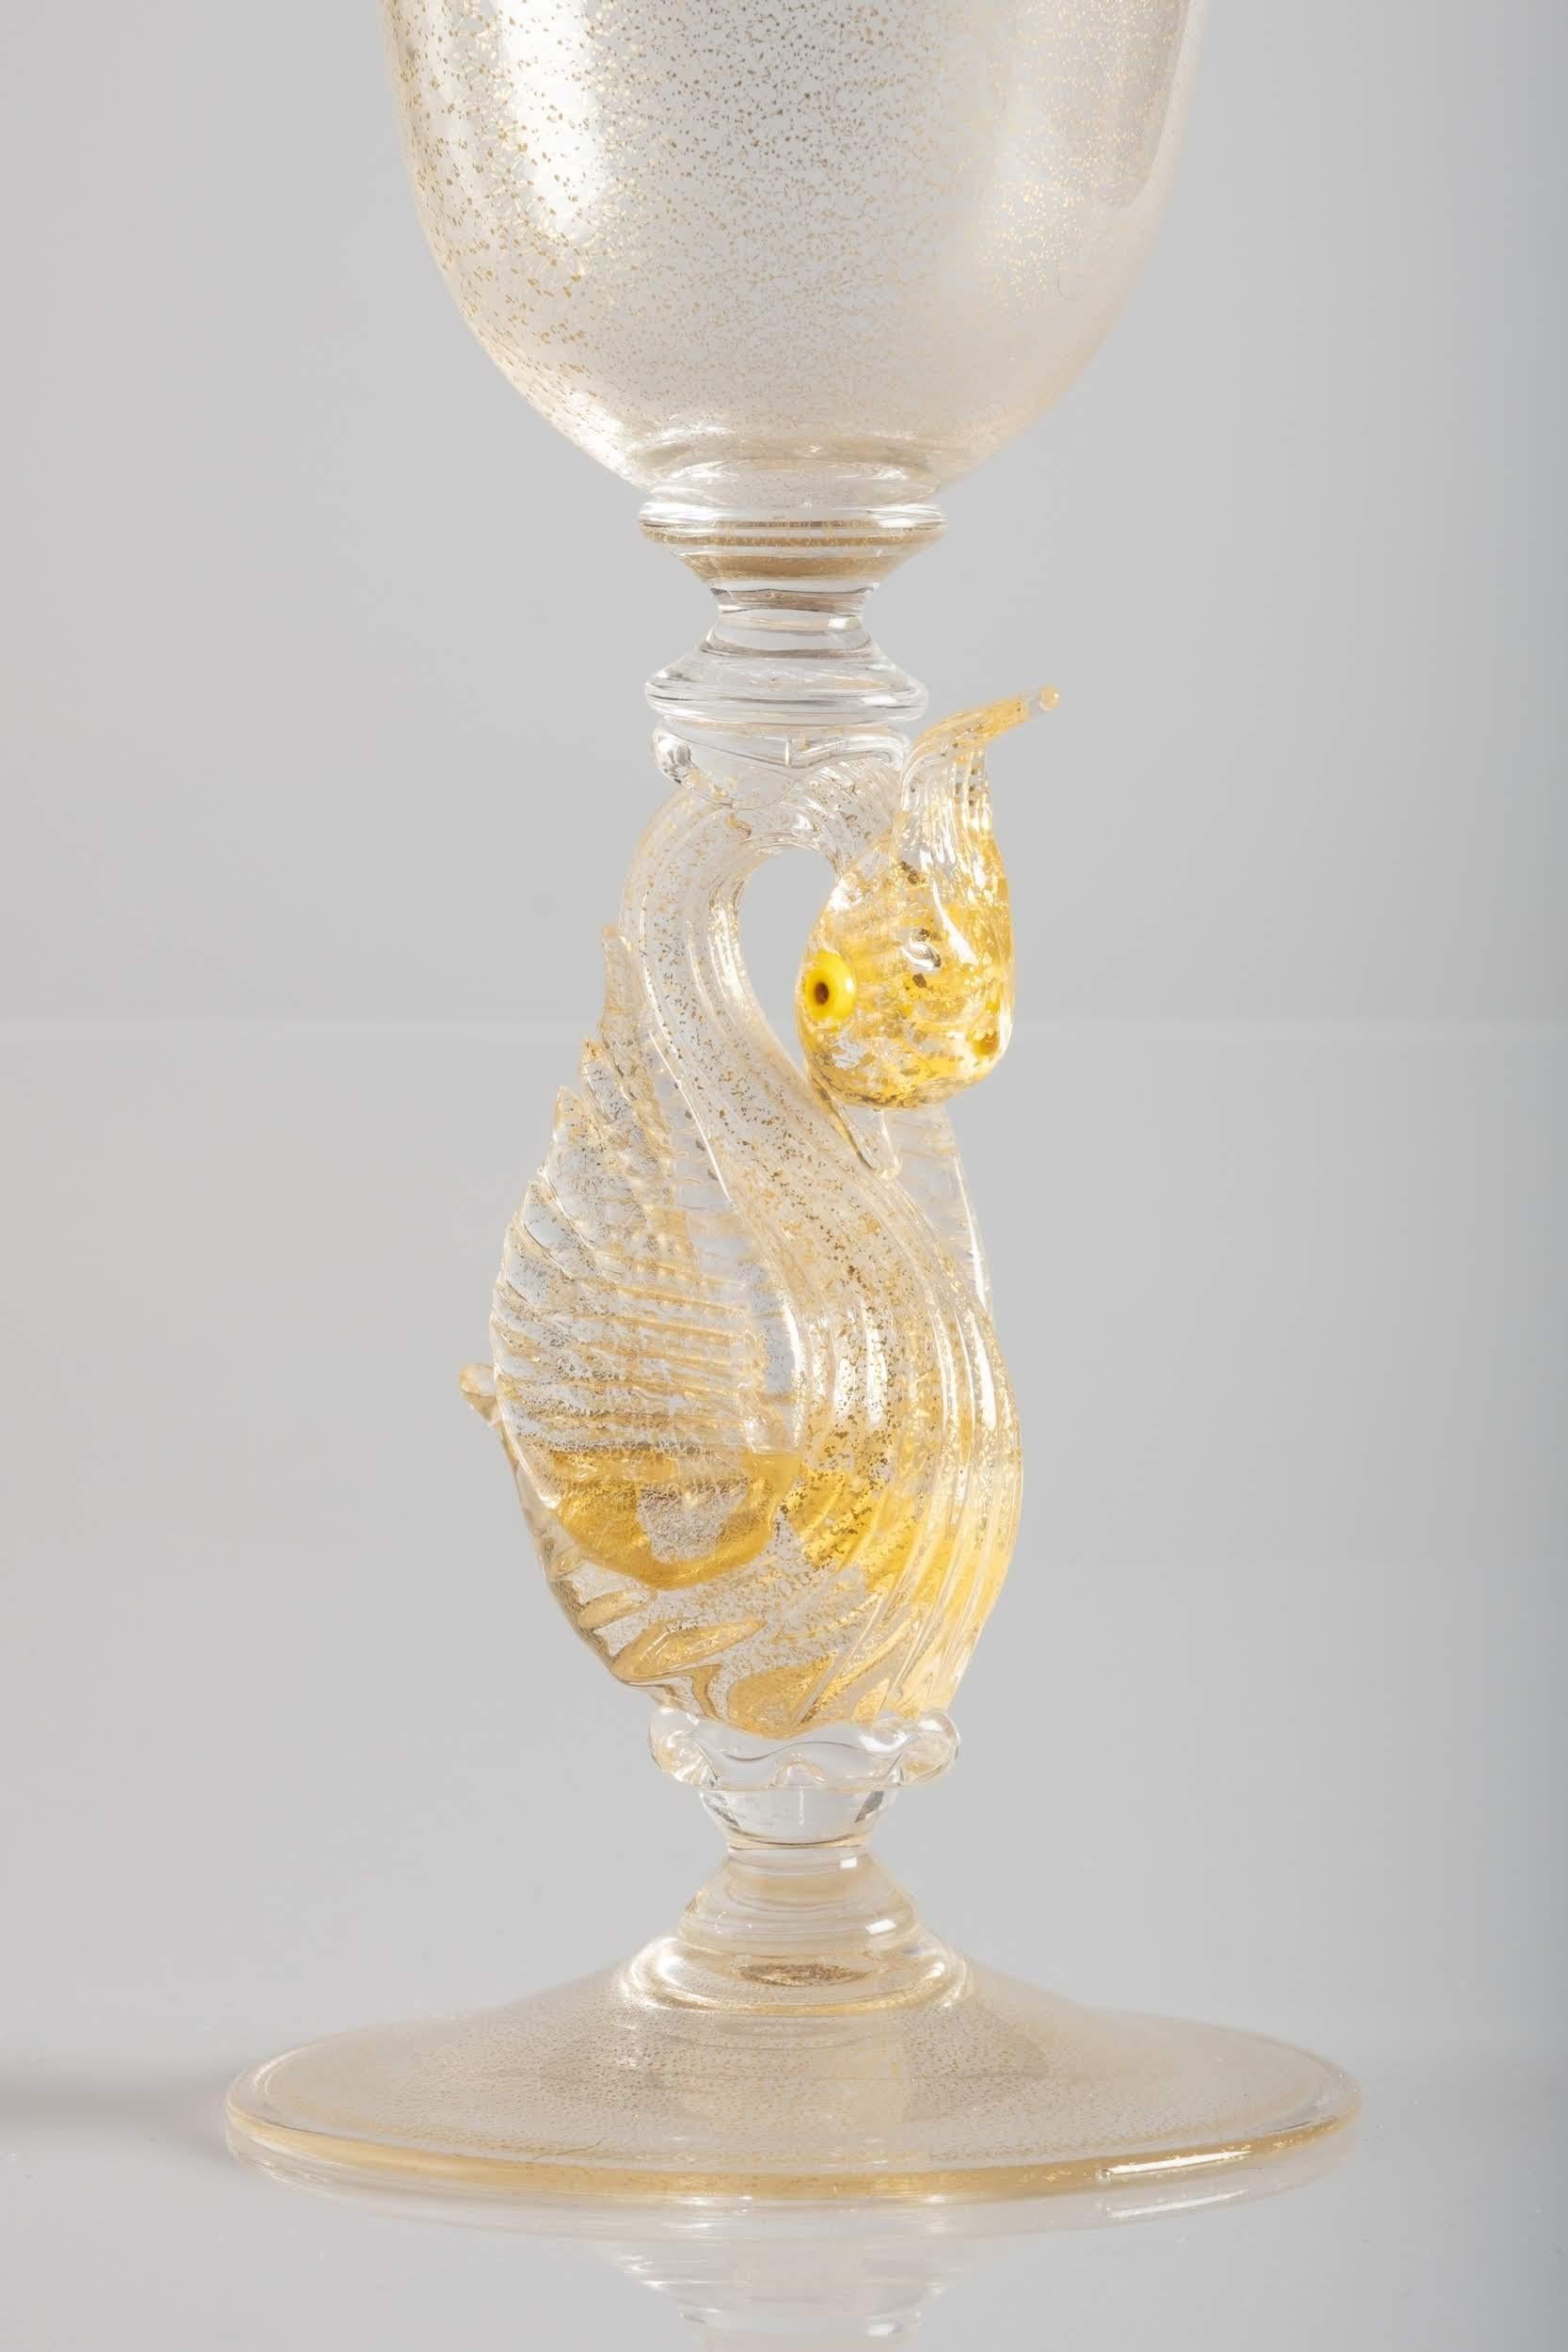 Hand blown by the world famous Venician masters of glass blowing from Murano.